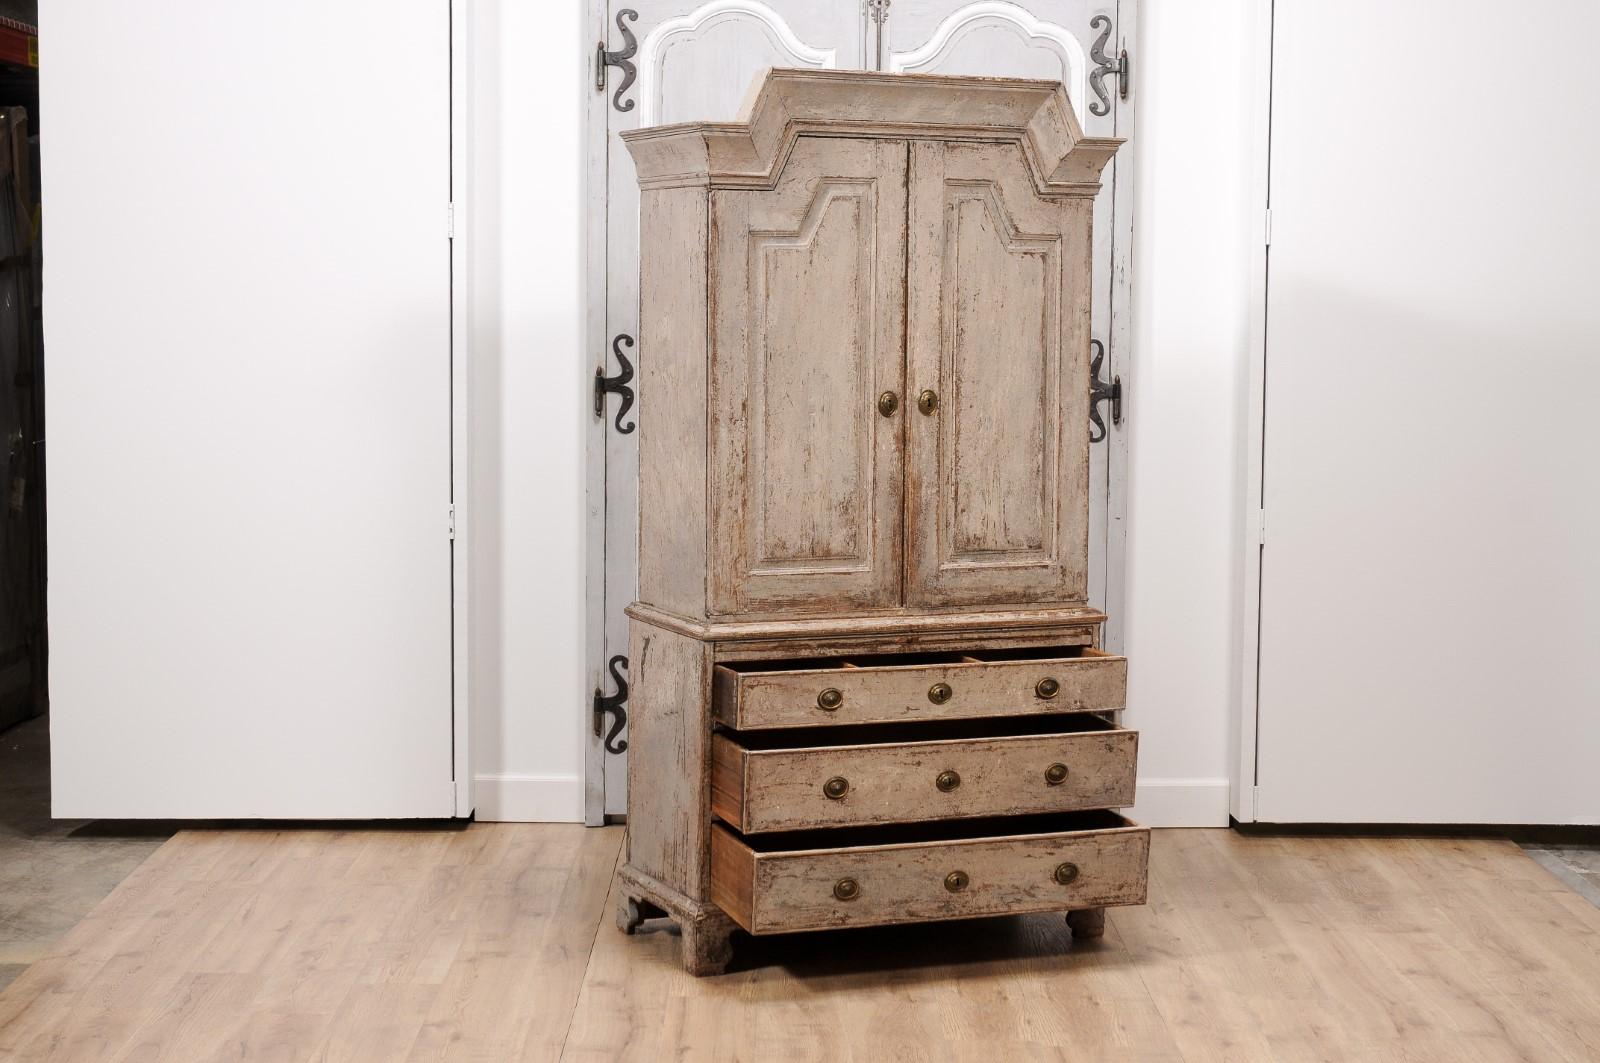 19th Century Swedish Gustavian Period 1802 Painted Wood Cupboard with Doors and Drawers For Sale